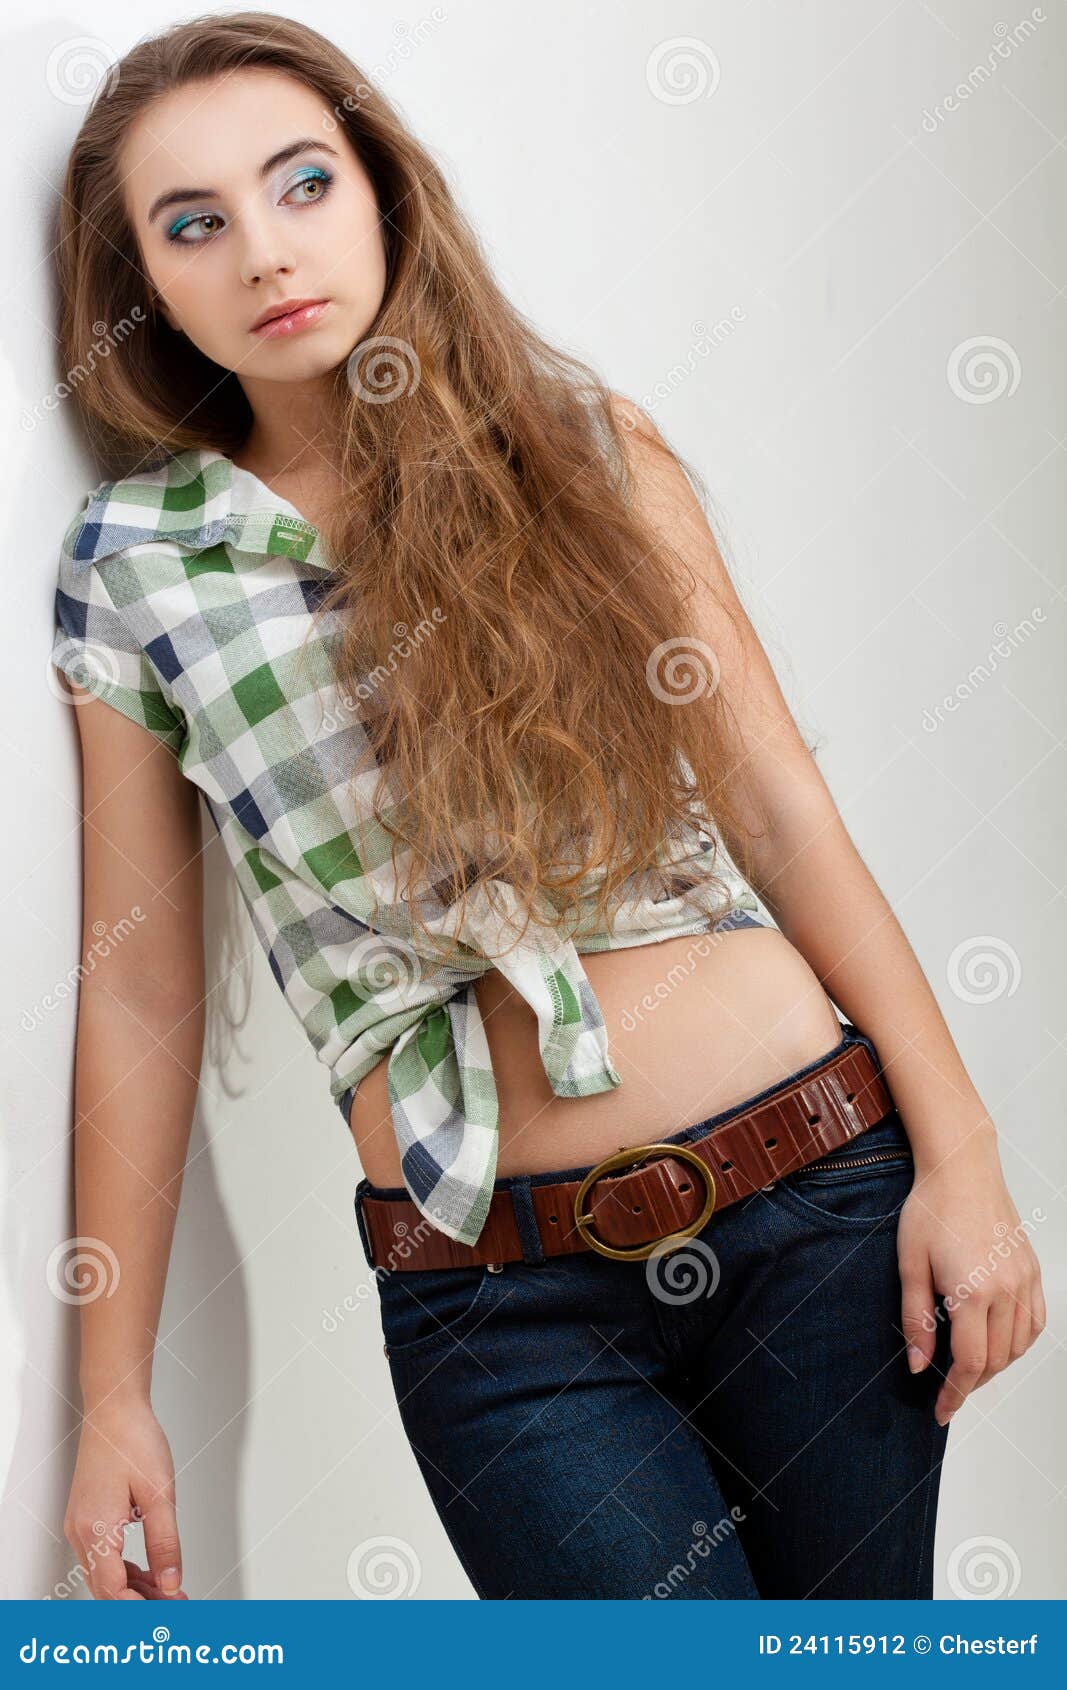 Fashion Model Woman Wearing Country Style Clothes Stock Photo - Image ...